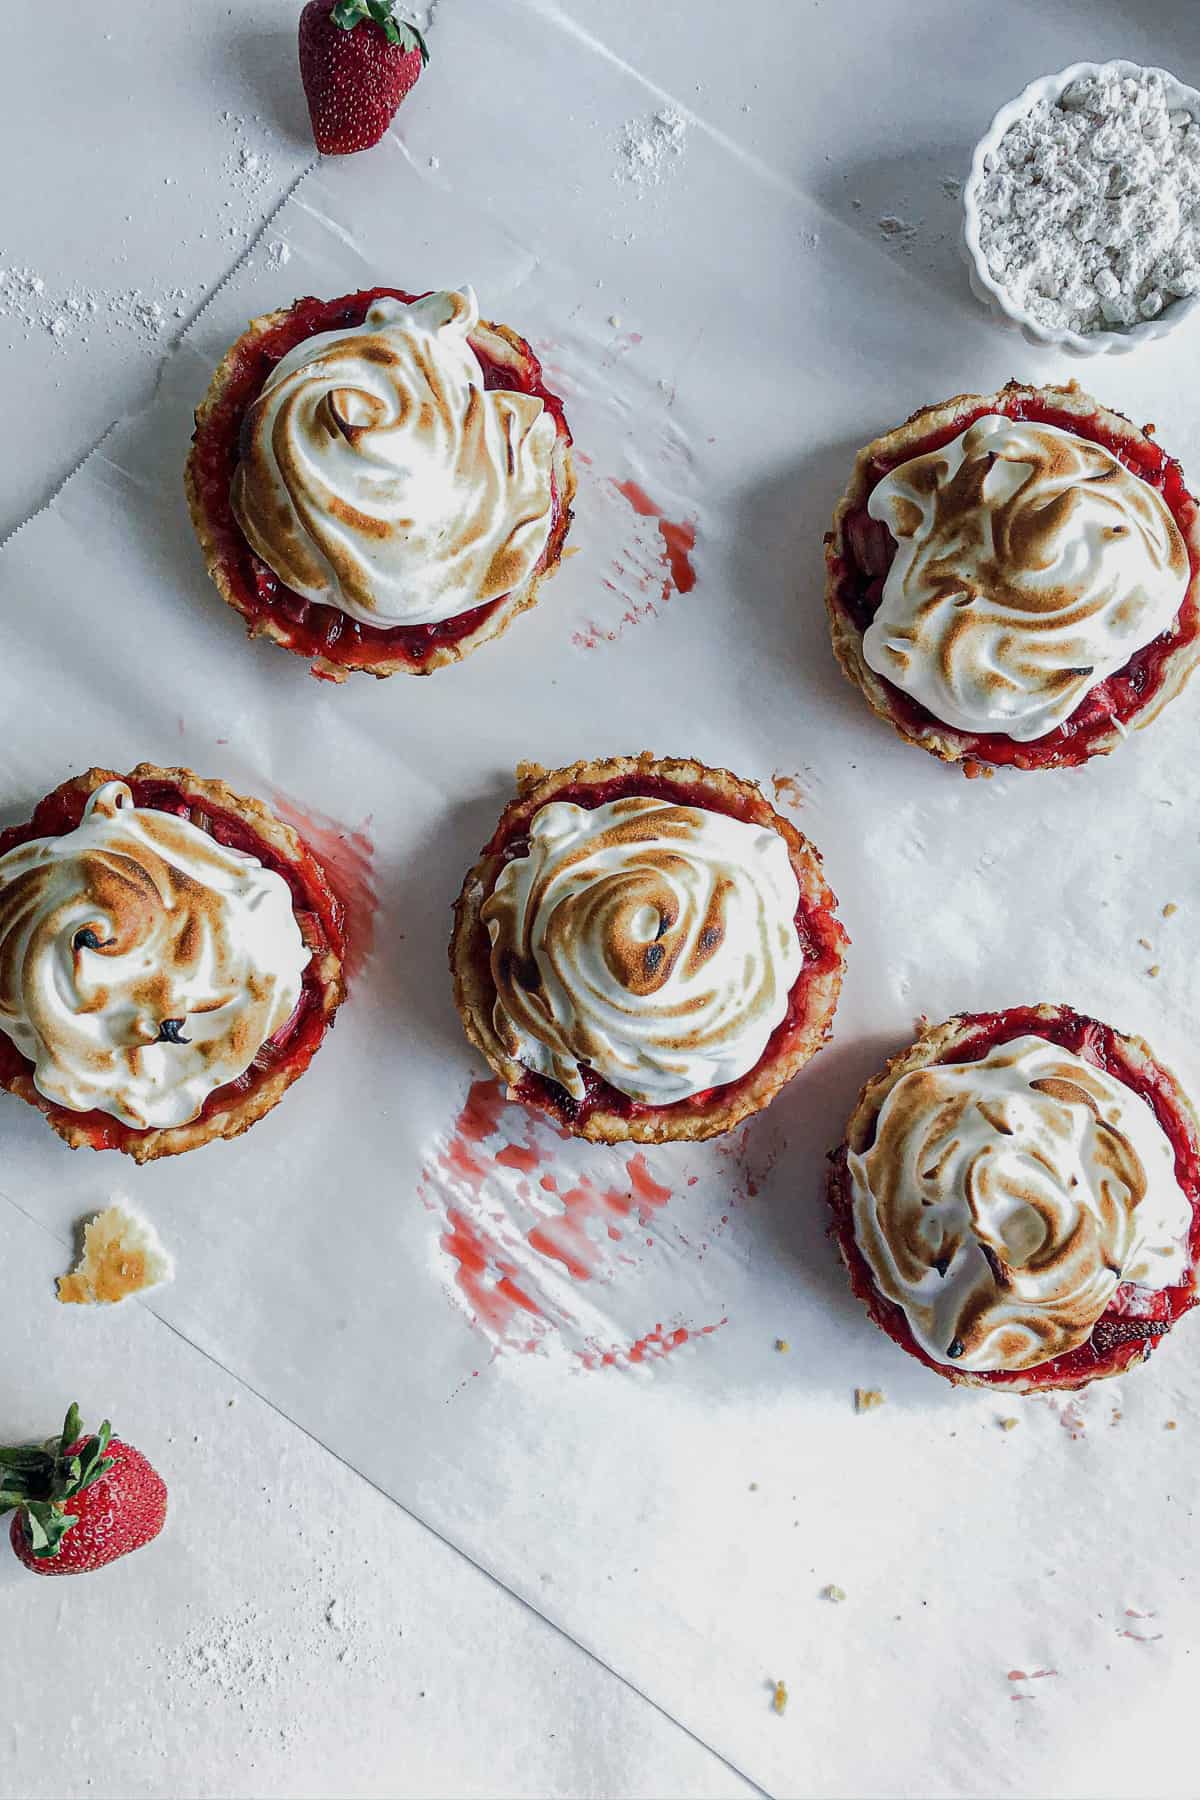 Strawberry rhubarb tartlets are a great dessert to go with spaghetti.